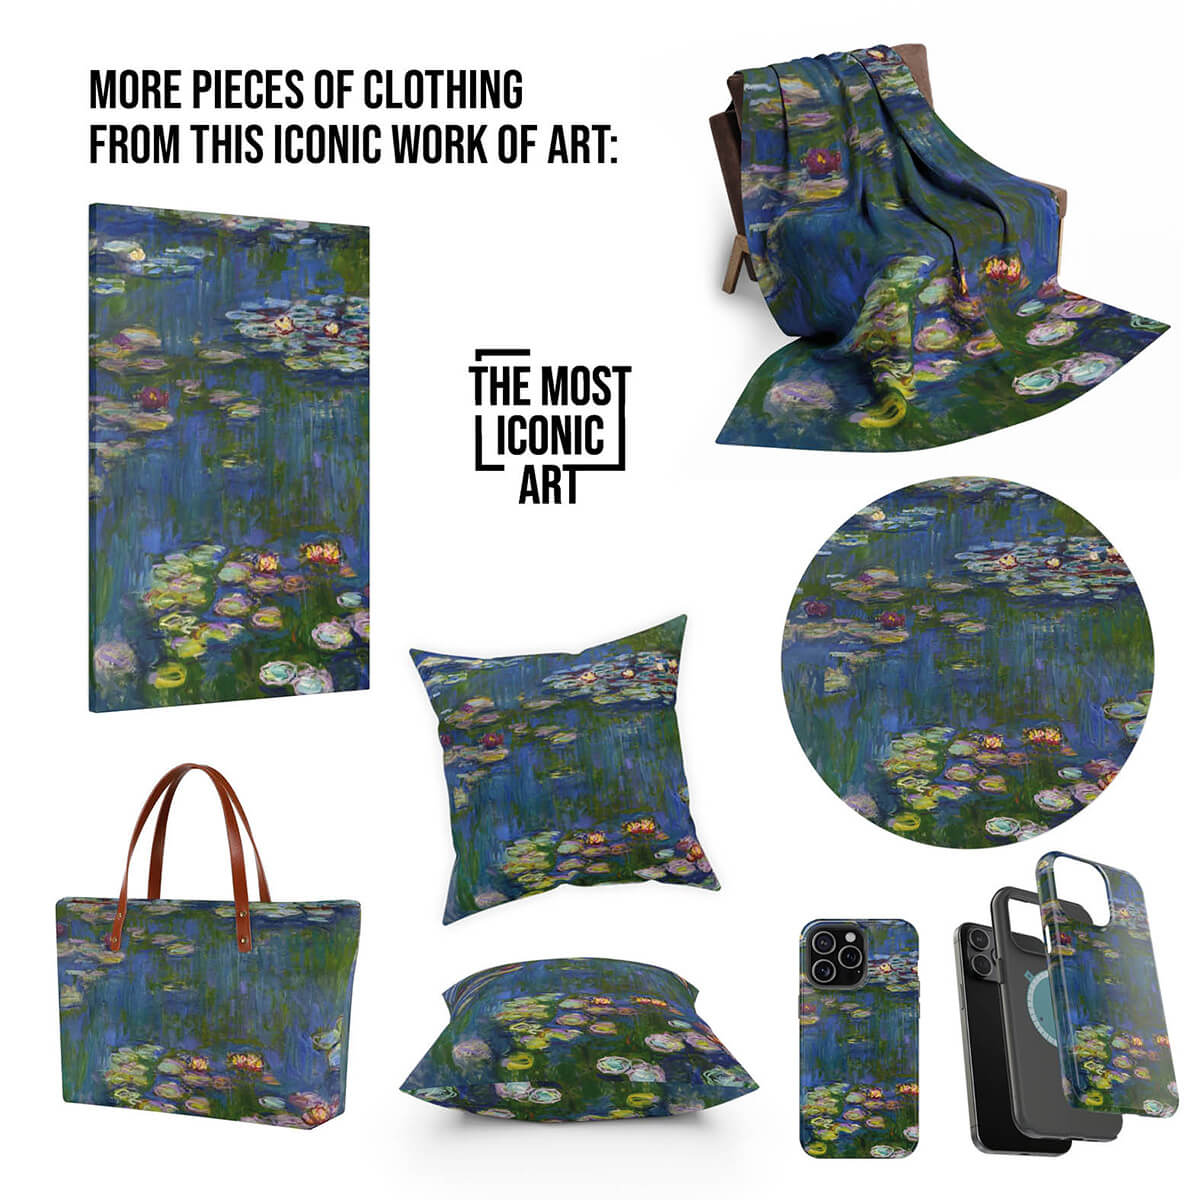 Perfect gift for art aficionados and Monet admirers